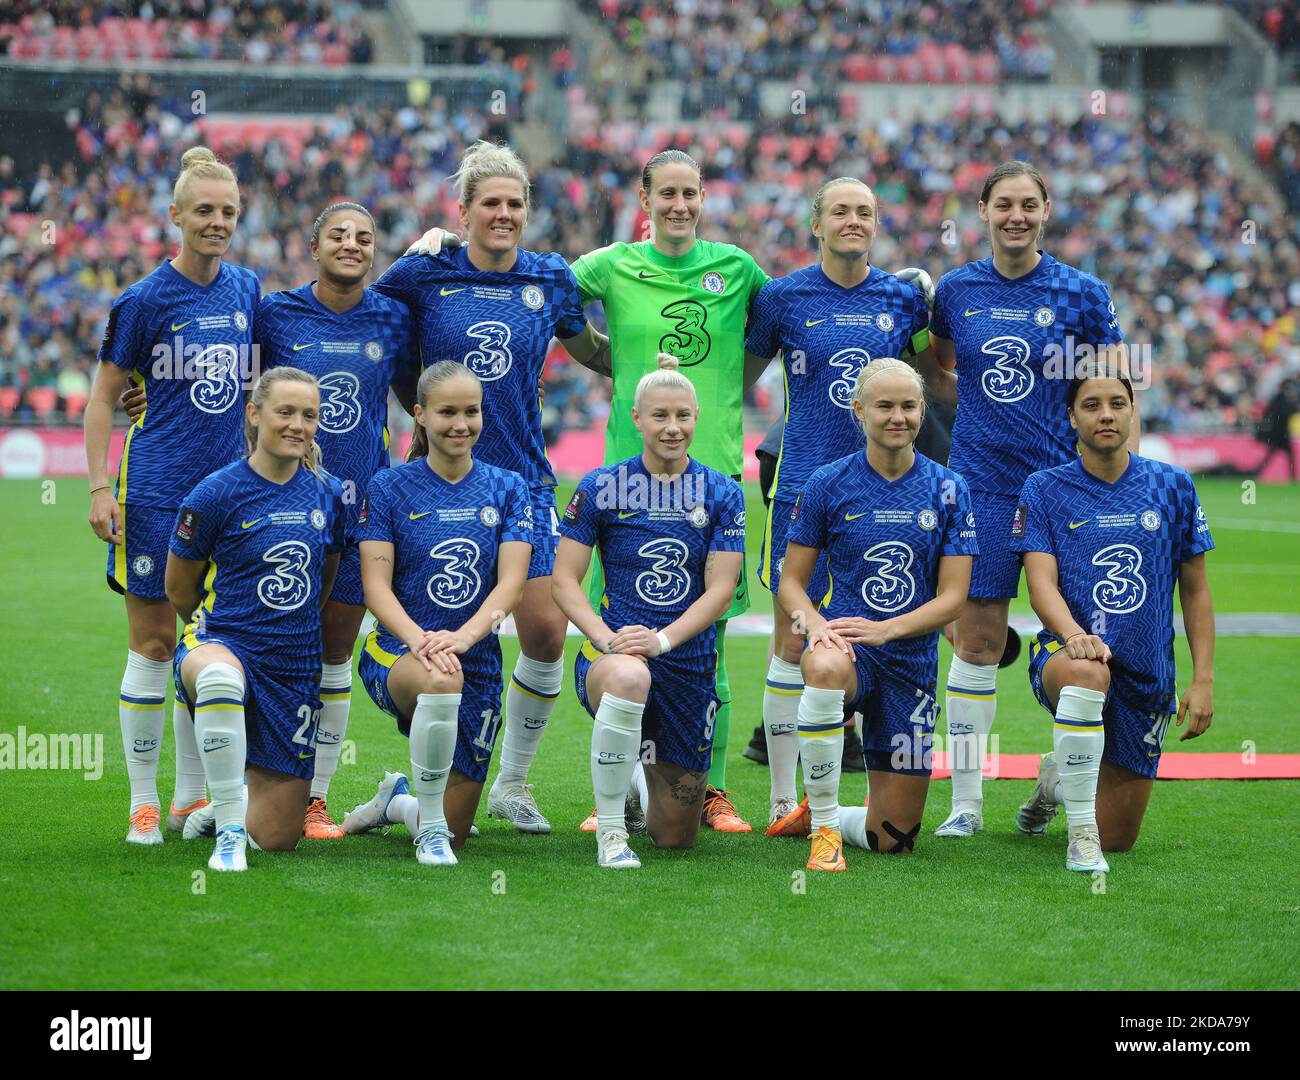 LONDON, ENGLAND - MAY 15:Chelsea team group Back row l-r. Sophie Ingle, Jess Carter, Millie Bright, Ann - Katrin Berger, Magdalena Eriksson, Aniek Nouwen. Front : Erin Cuthbert, Guro Reiten, Bethany England, Pernille Harder, Sam Kerr. Before kick off Women's FA Cup Final between Chelsea Women and Manchester City Women at Wembley Stadium , London, UK 15th May , 2022 (Photo by Action Foto Sport/NurPhoto) Stock Photo